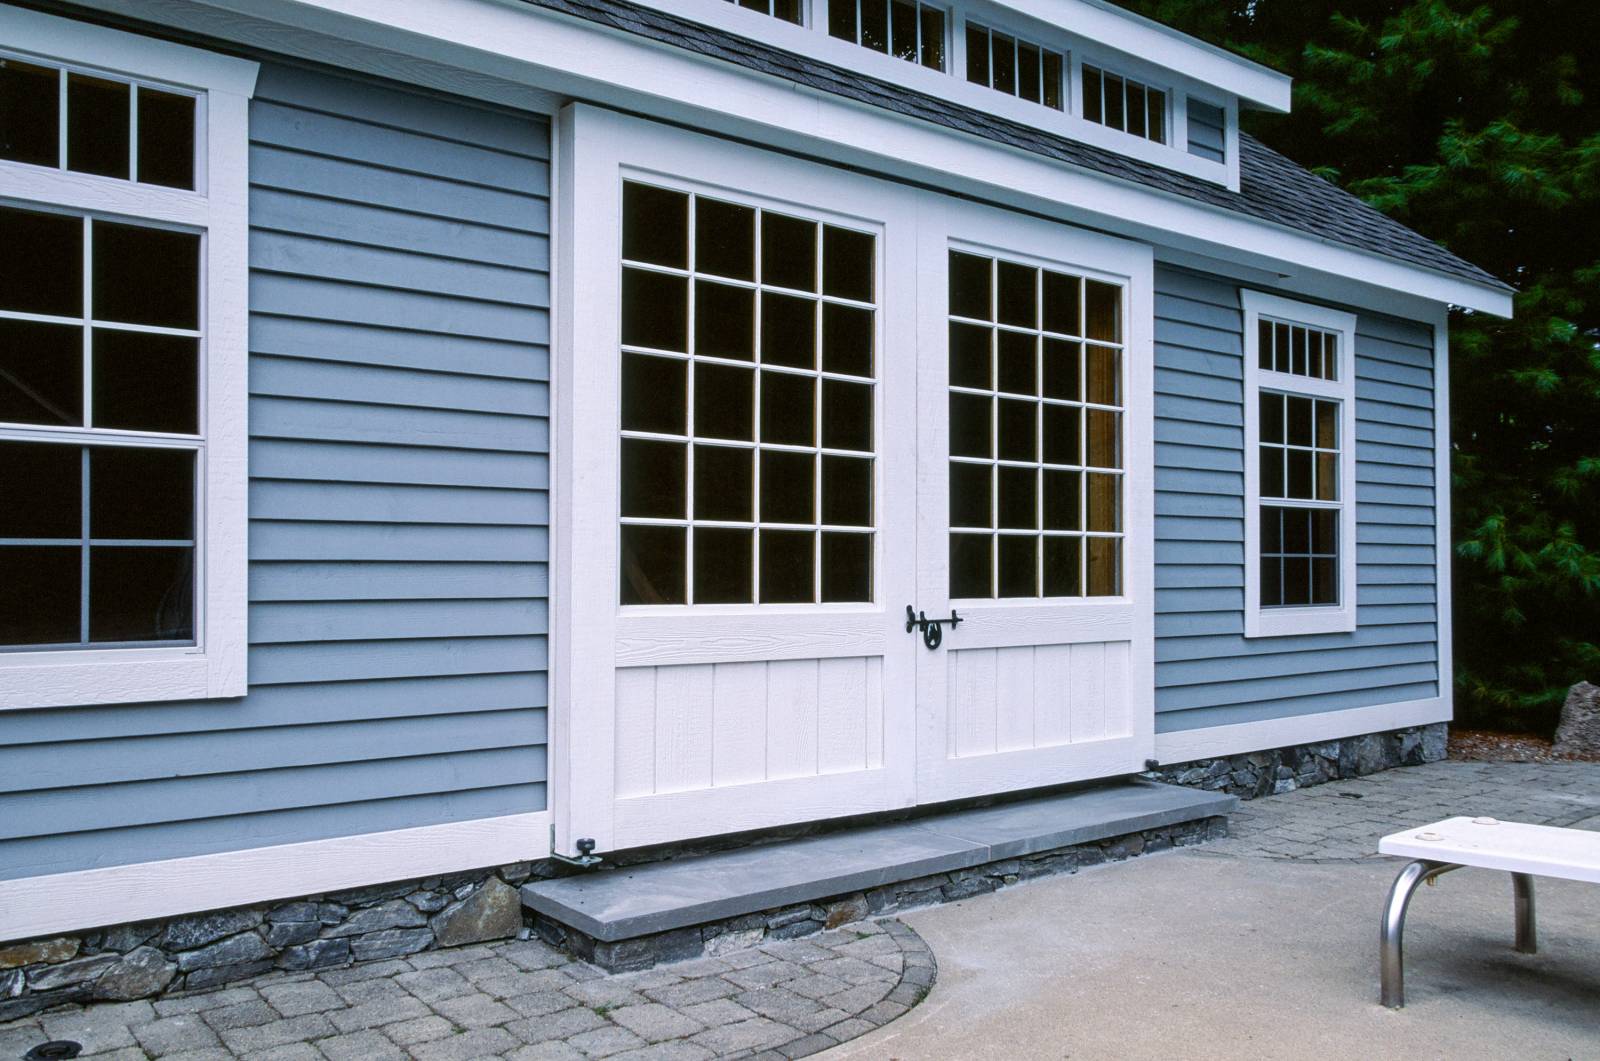 Notice the details: sliding barn doors with 20-lite glass • cedar clapboard siding with custom paint color • wide trim • rock facade on foundation